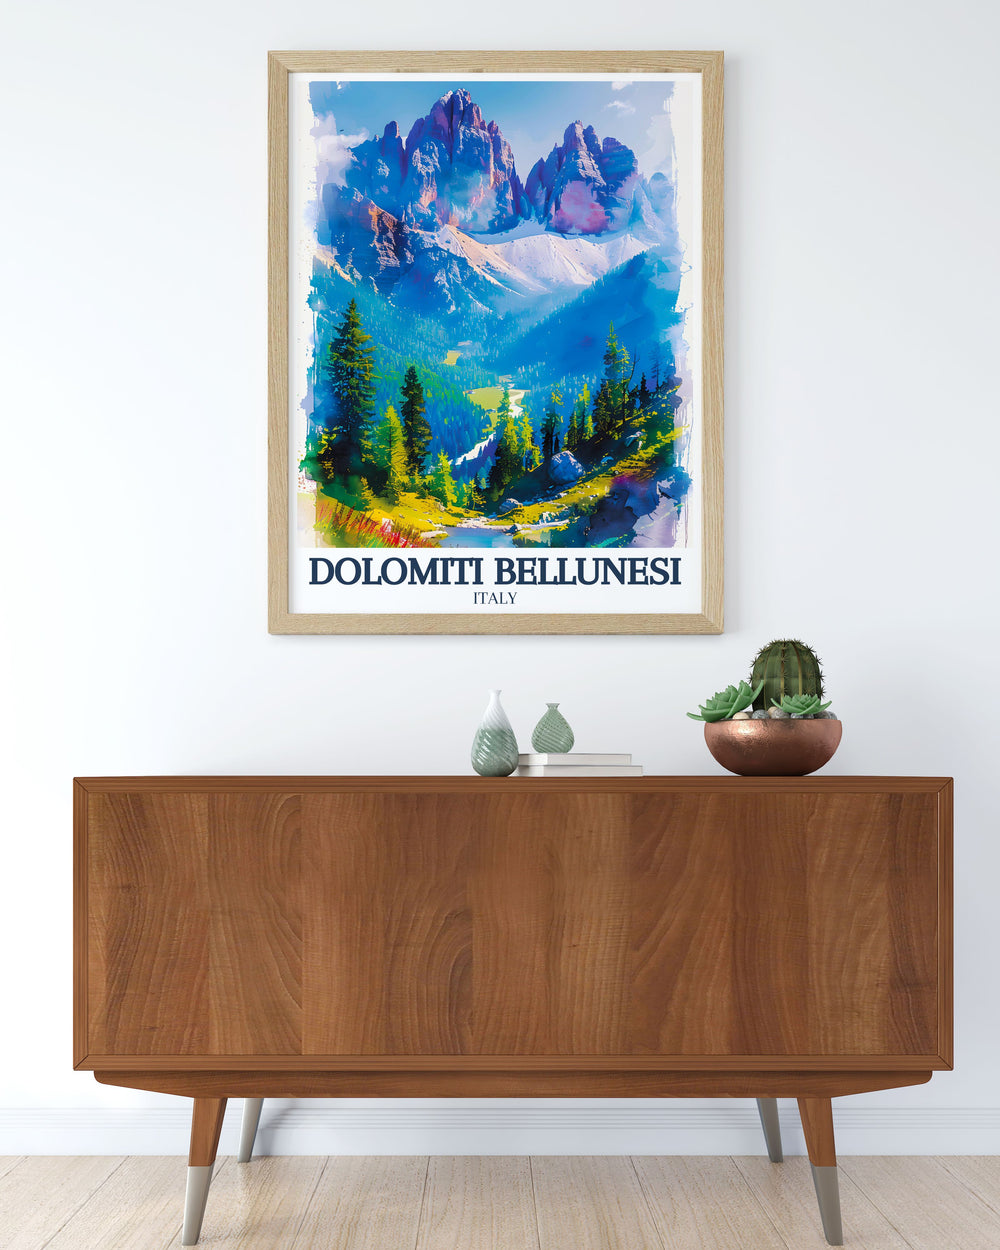 Vintage travel print of the Dolomite range showcasing the timeless charm and natural splendor of the Dolomiti Bellunesi ideal for adding a touch of classic elegance to your space.